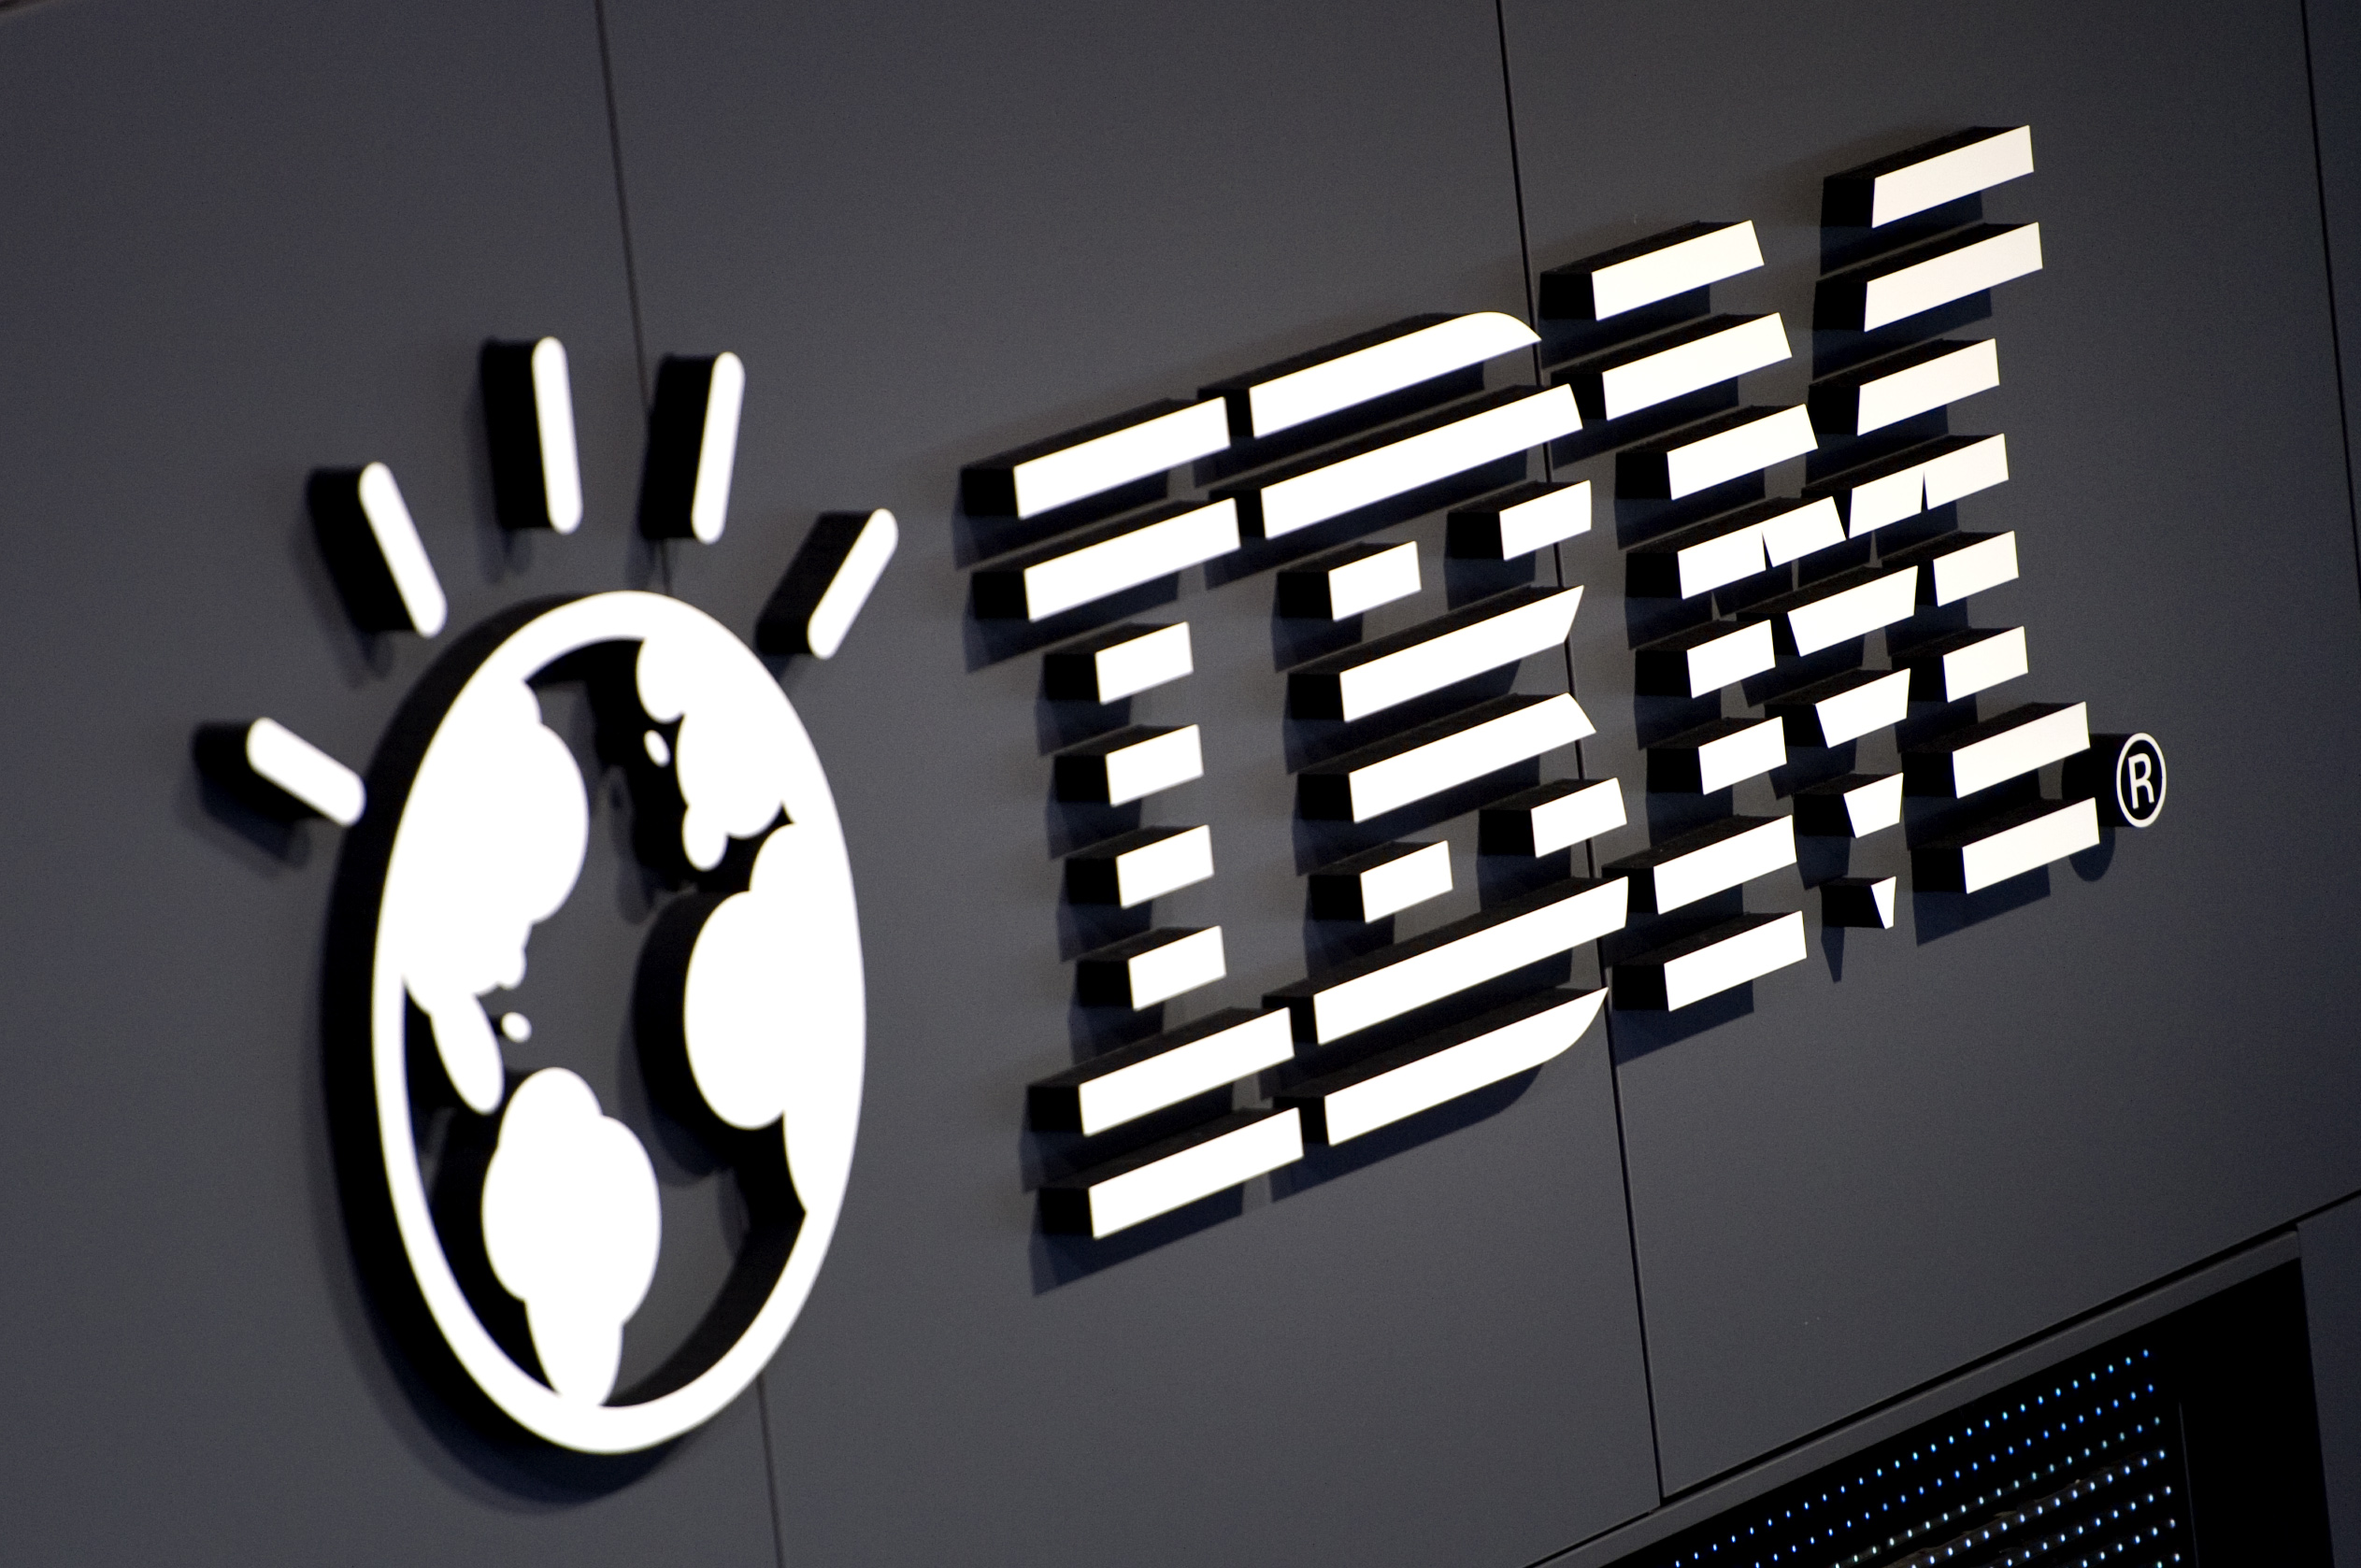 The logo of IBM is seen at their booth prior to the opening of the CeBIT IT fair on March 5, 2012 in Hanover, central Germany. (Odd Andersen&mdash;AFP/Getty Images)